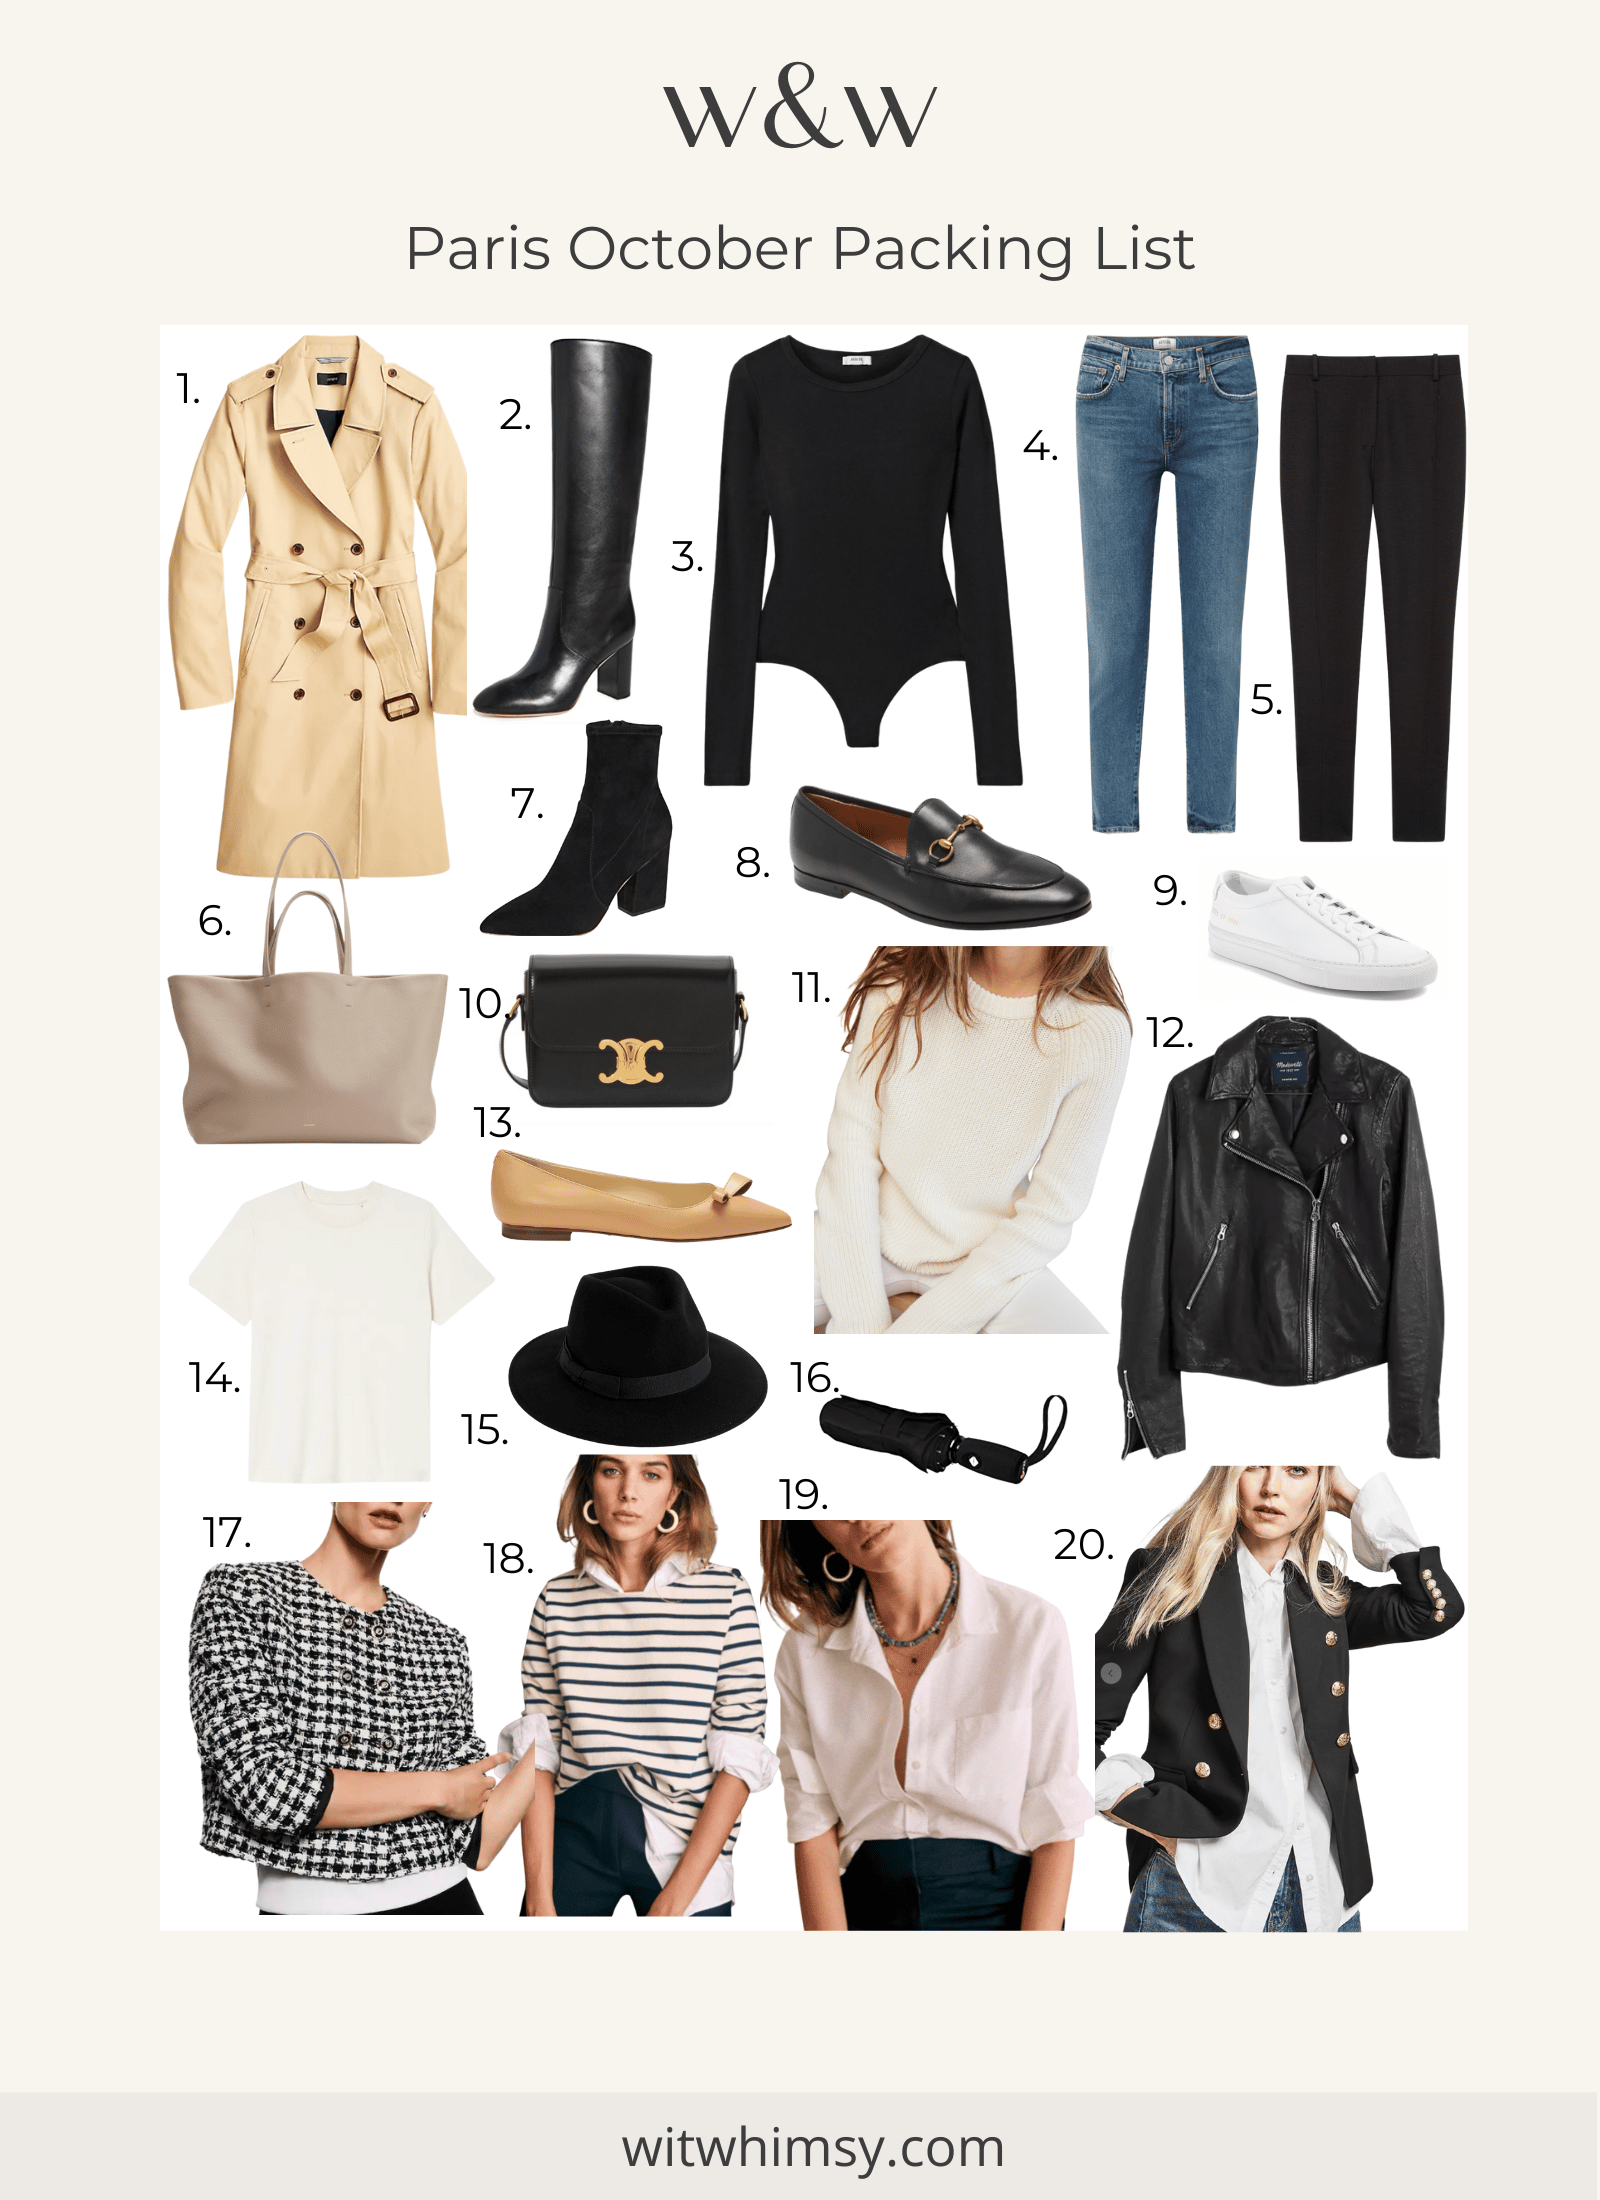 Paris Packing List for October Fall